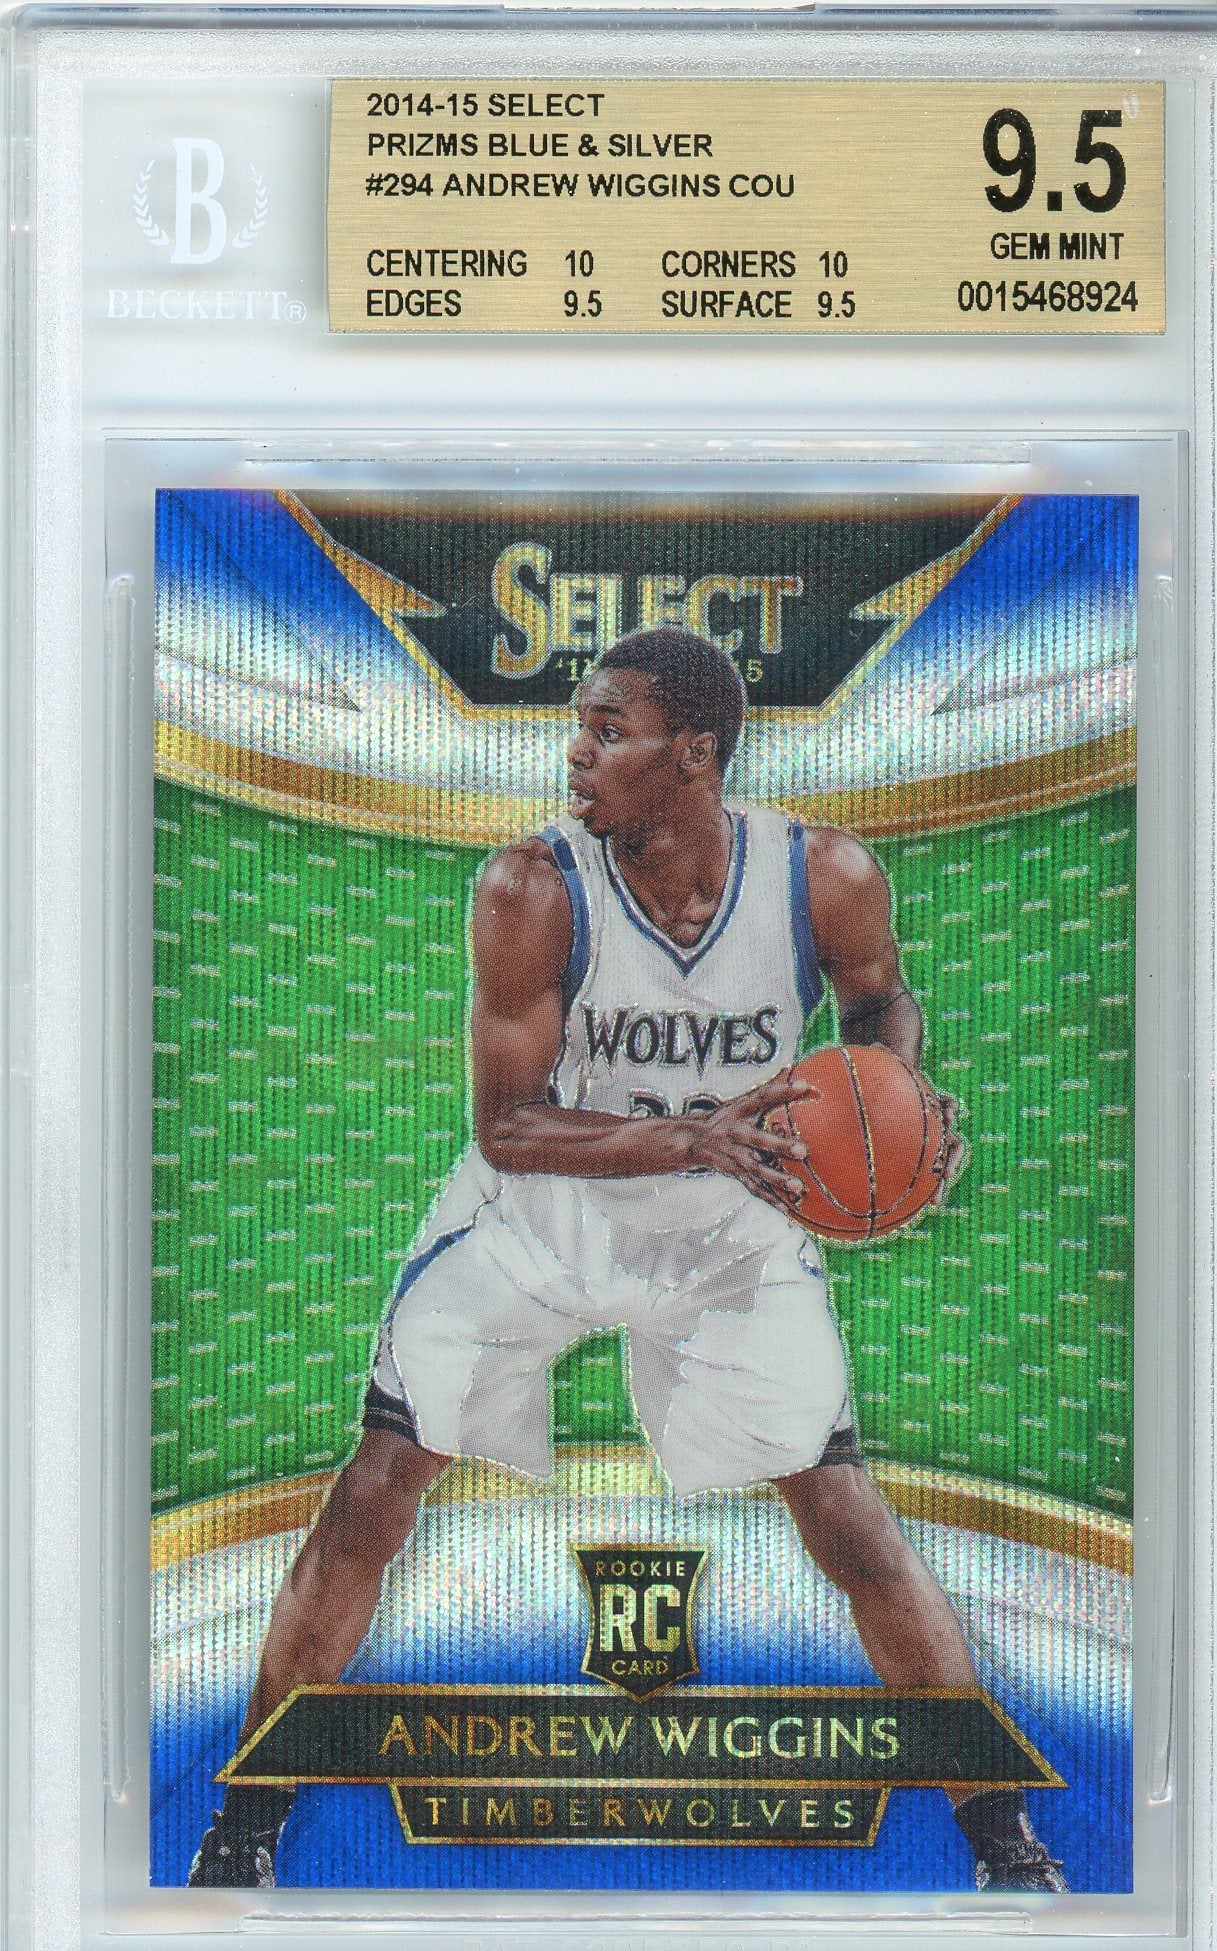 2014/15 Select Andrew Wiggins Prizms Blue & Silver Rookie BGS 9.5 Gem Mint